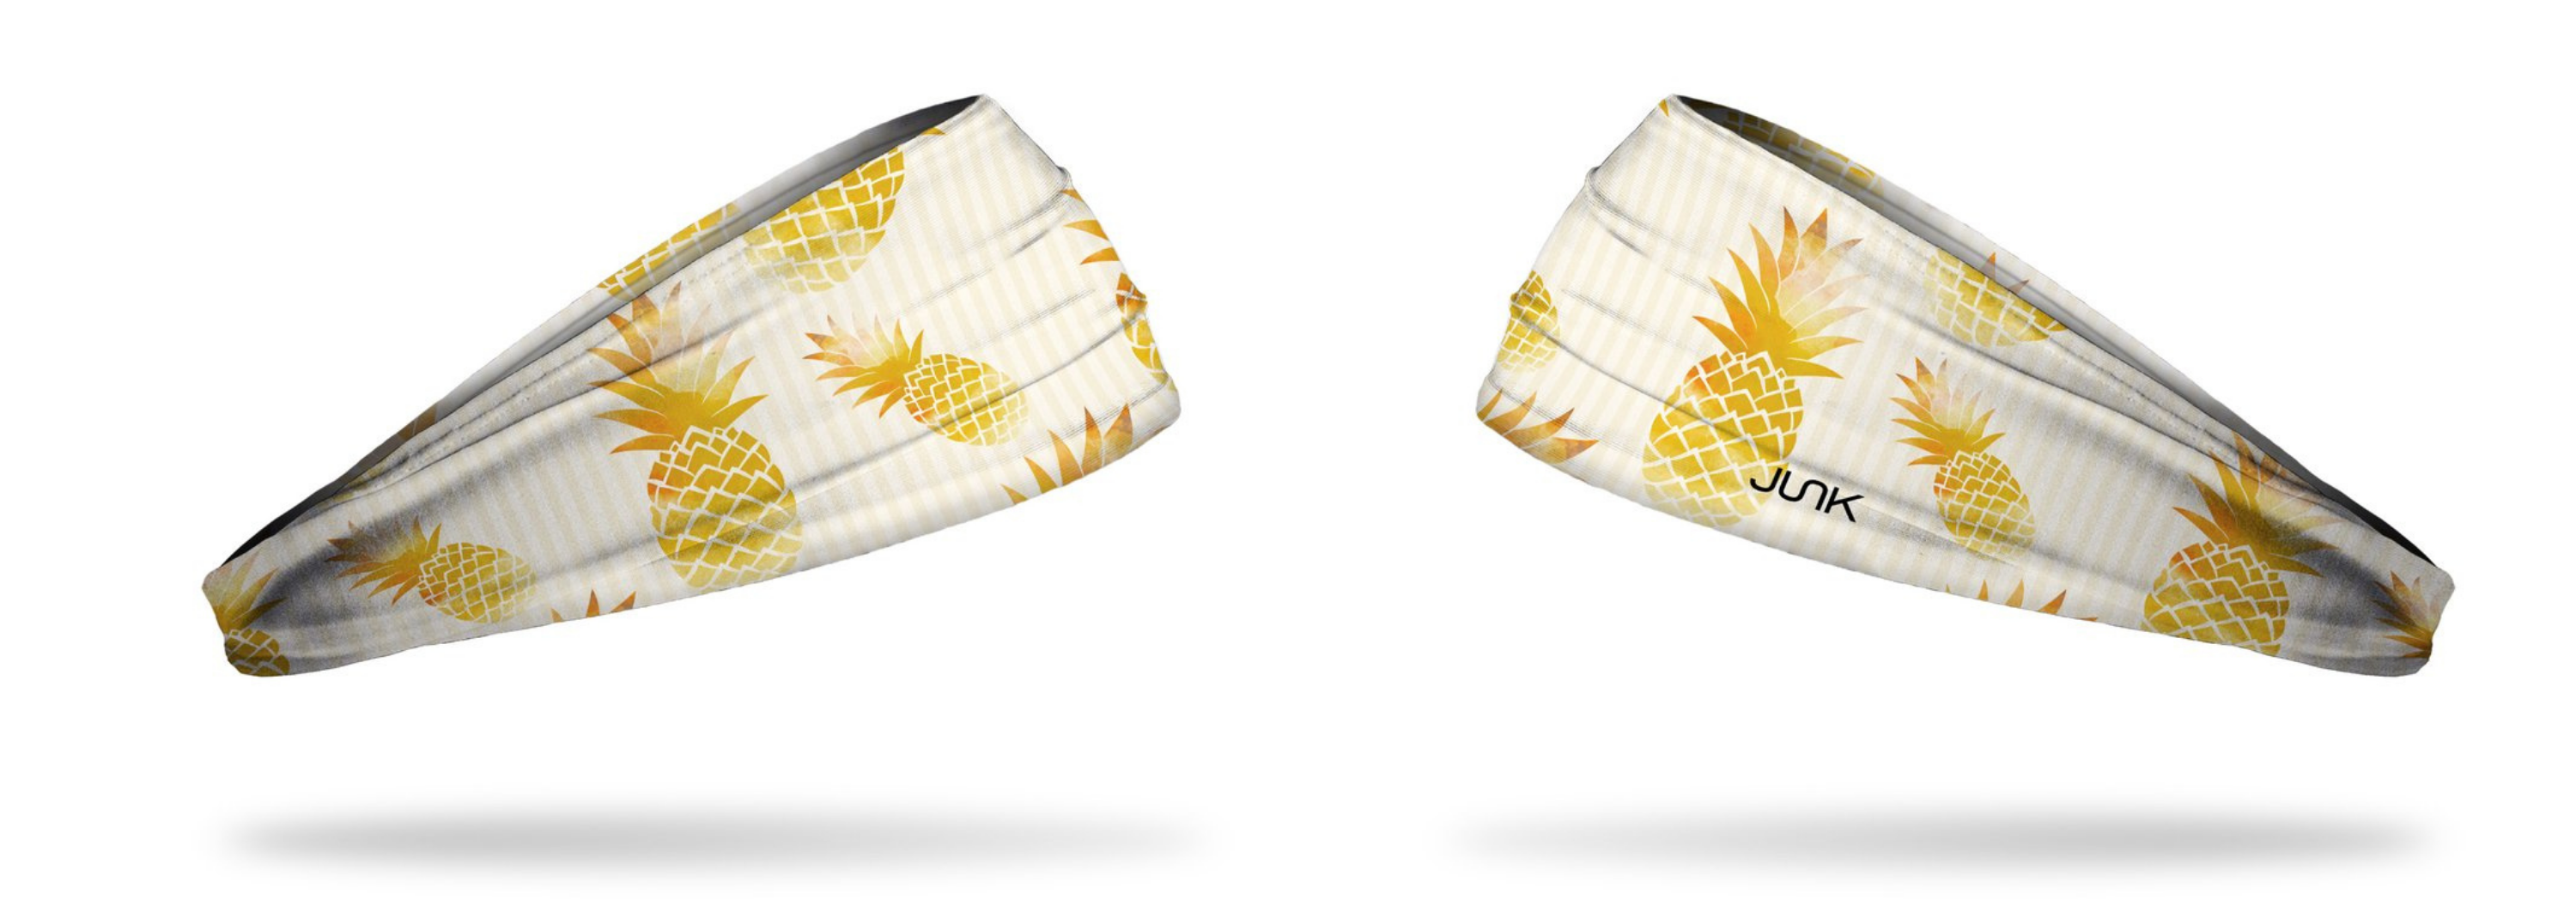 yellowish gold pineapples on a white headband with designs on it